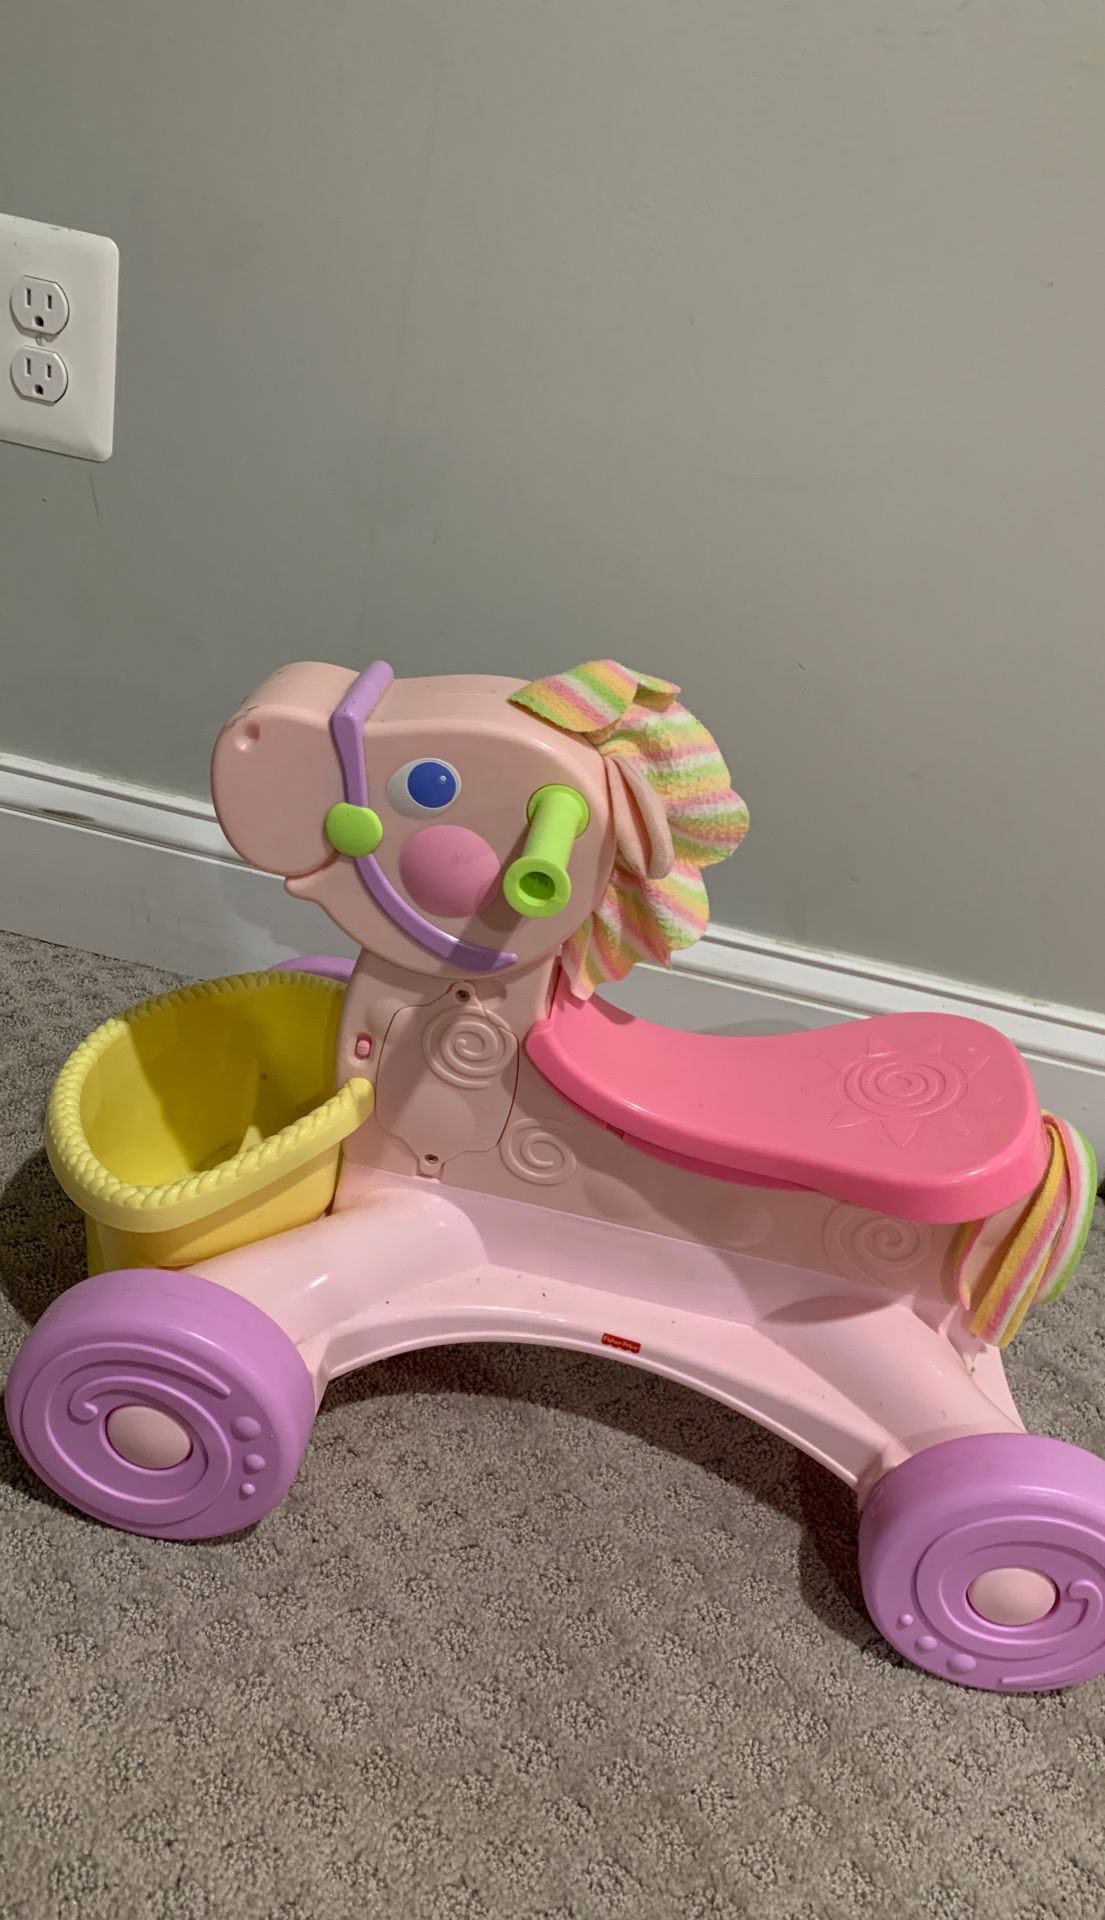 Baby toy horse car